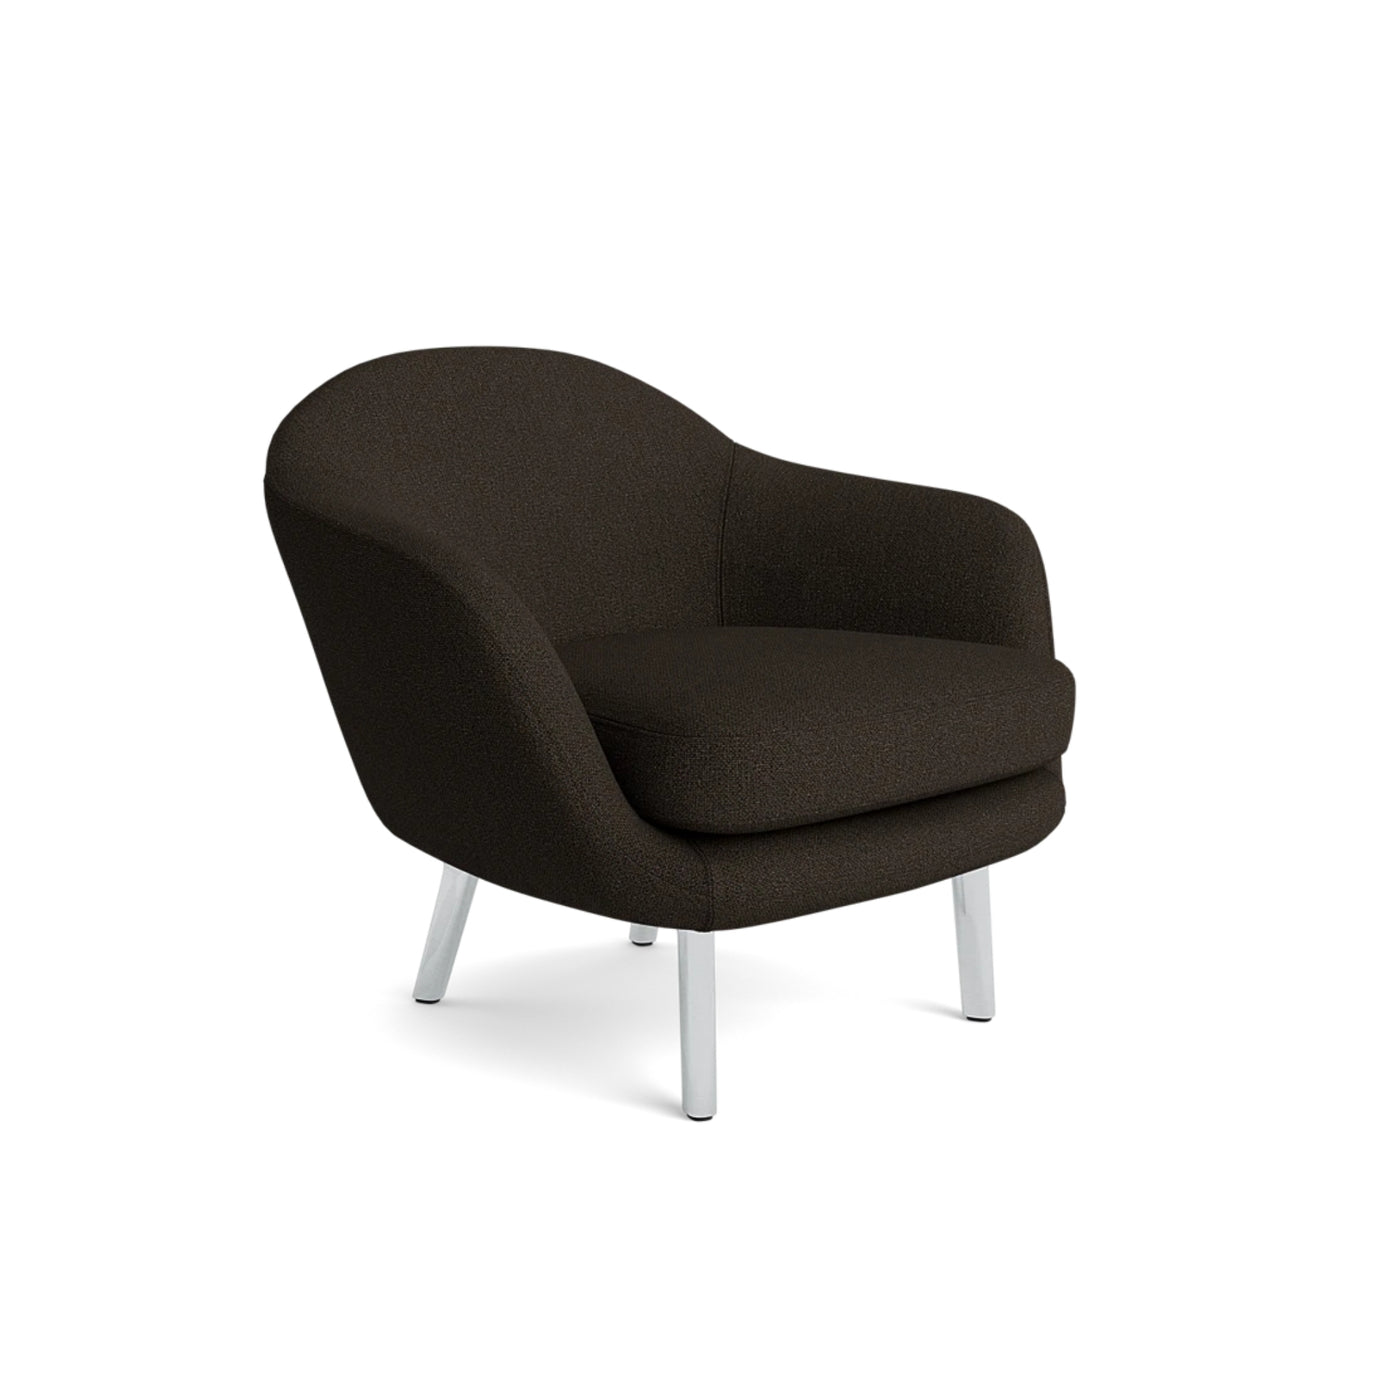 Normann Copenhagen Sum Armchair. Made to order at someday designs. #colour_hallingdal-376